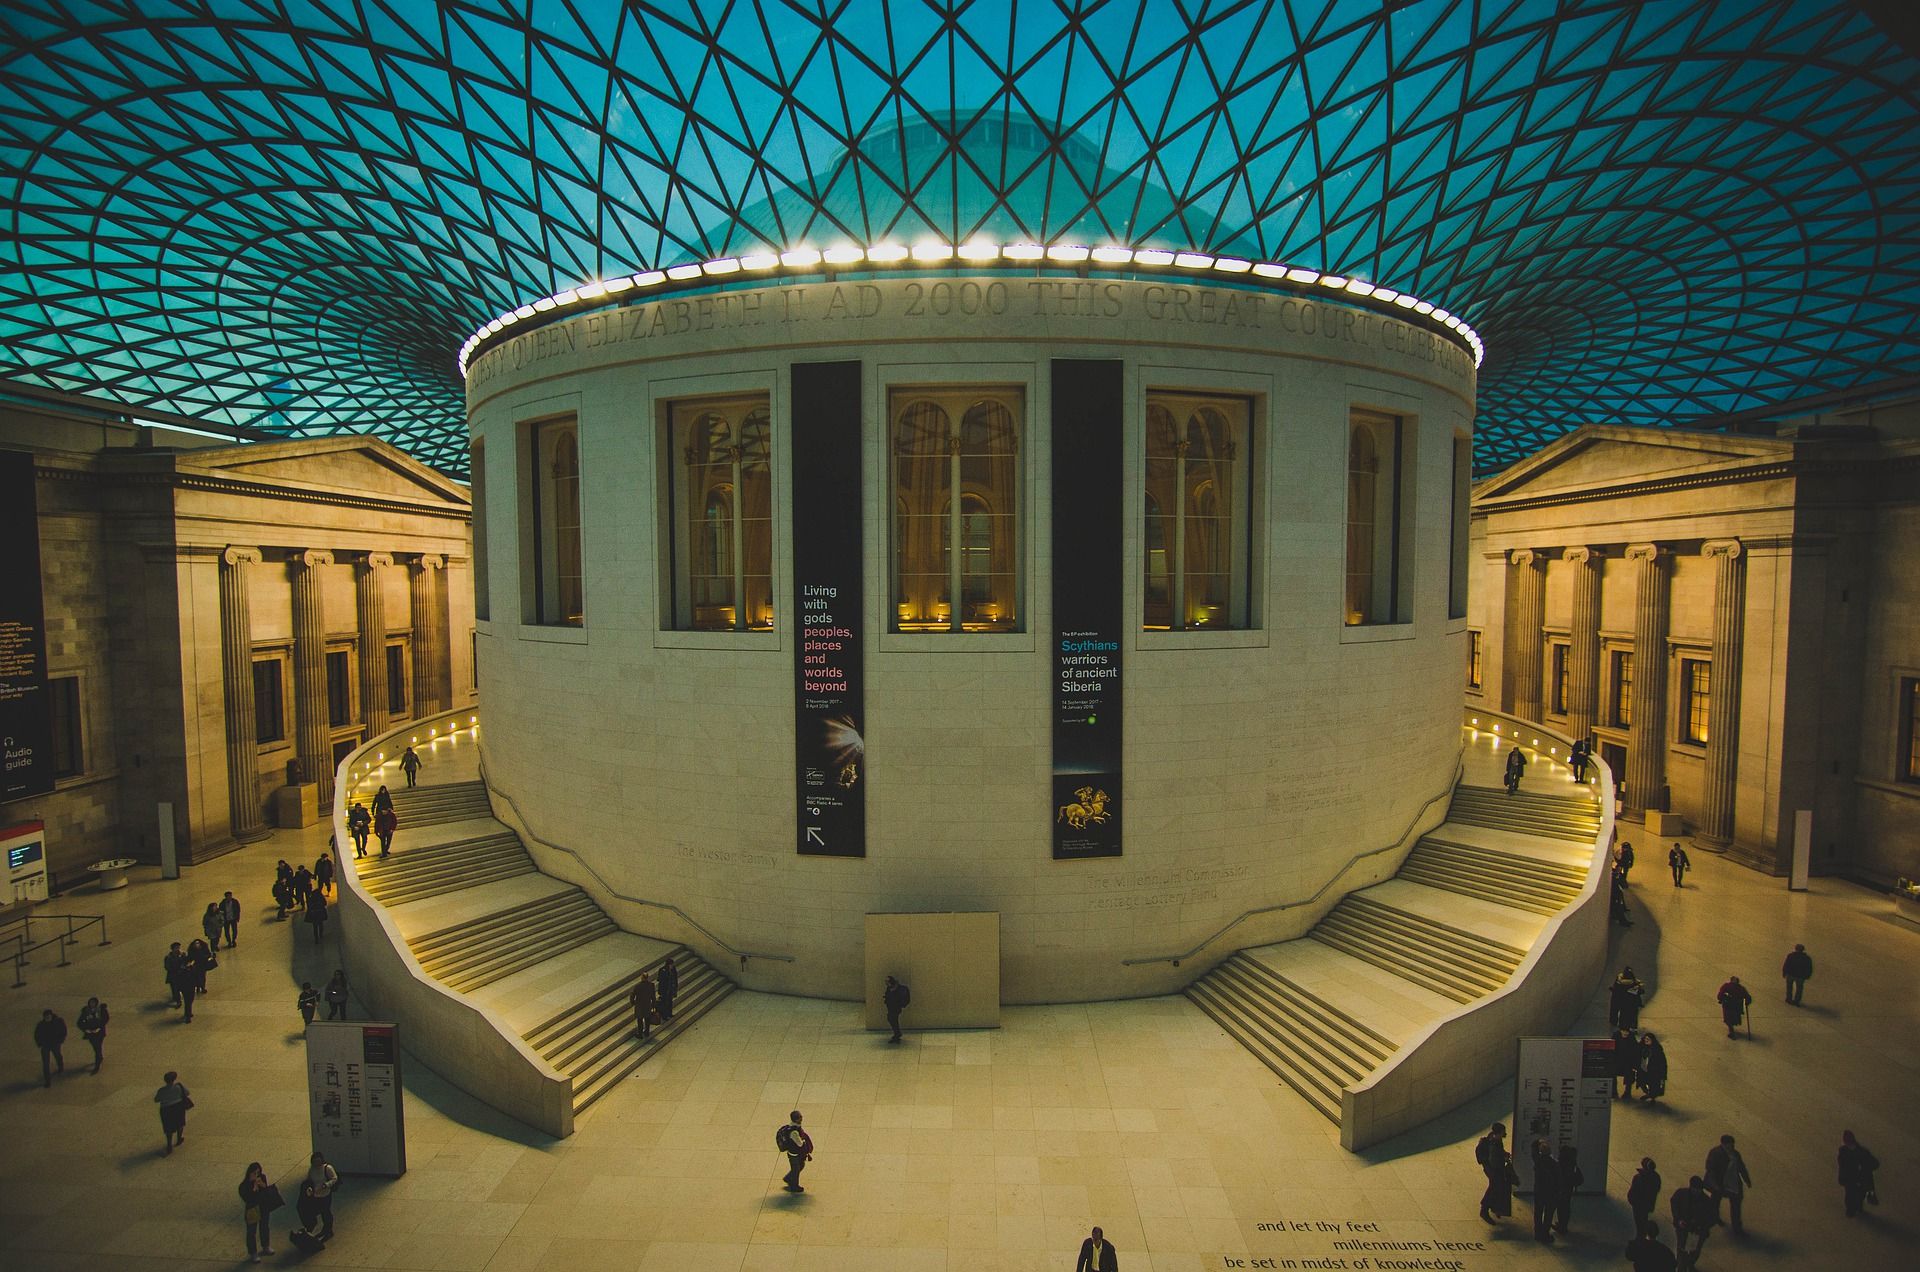 There is no denying that the British Museum badly needs a make-over, above ground as well as apparently below